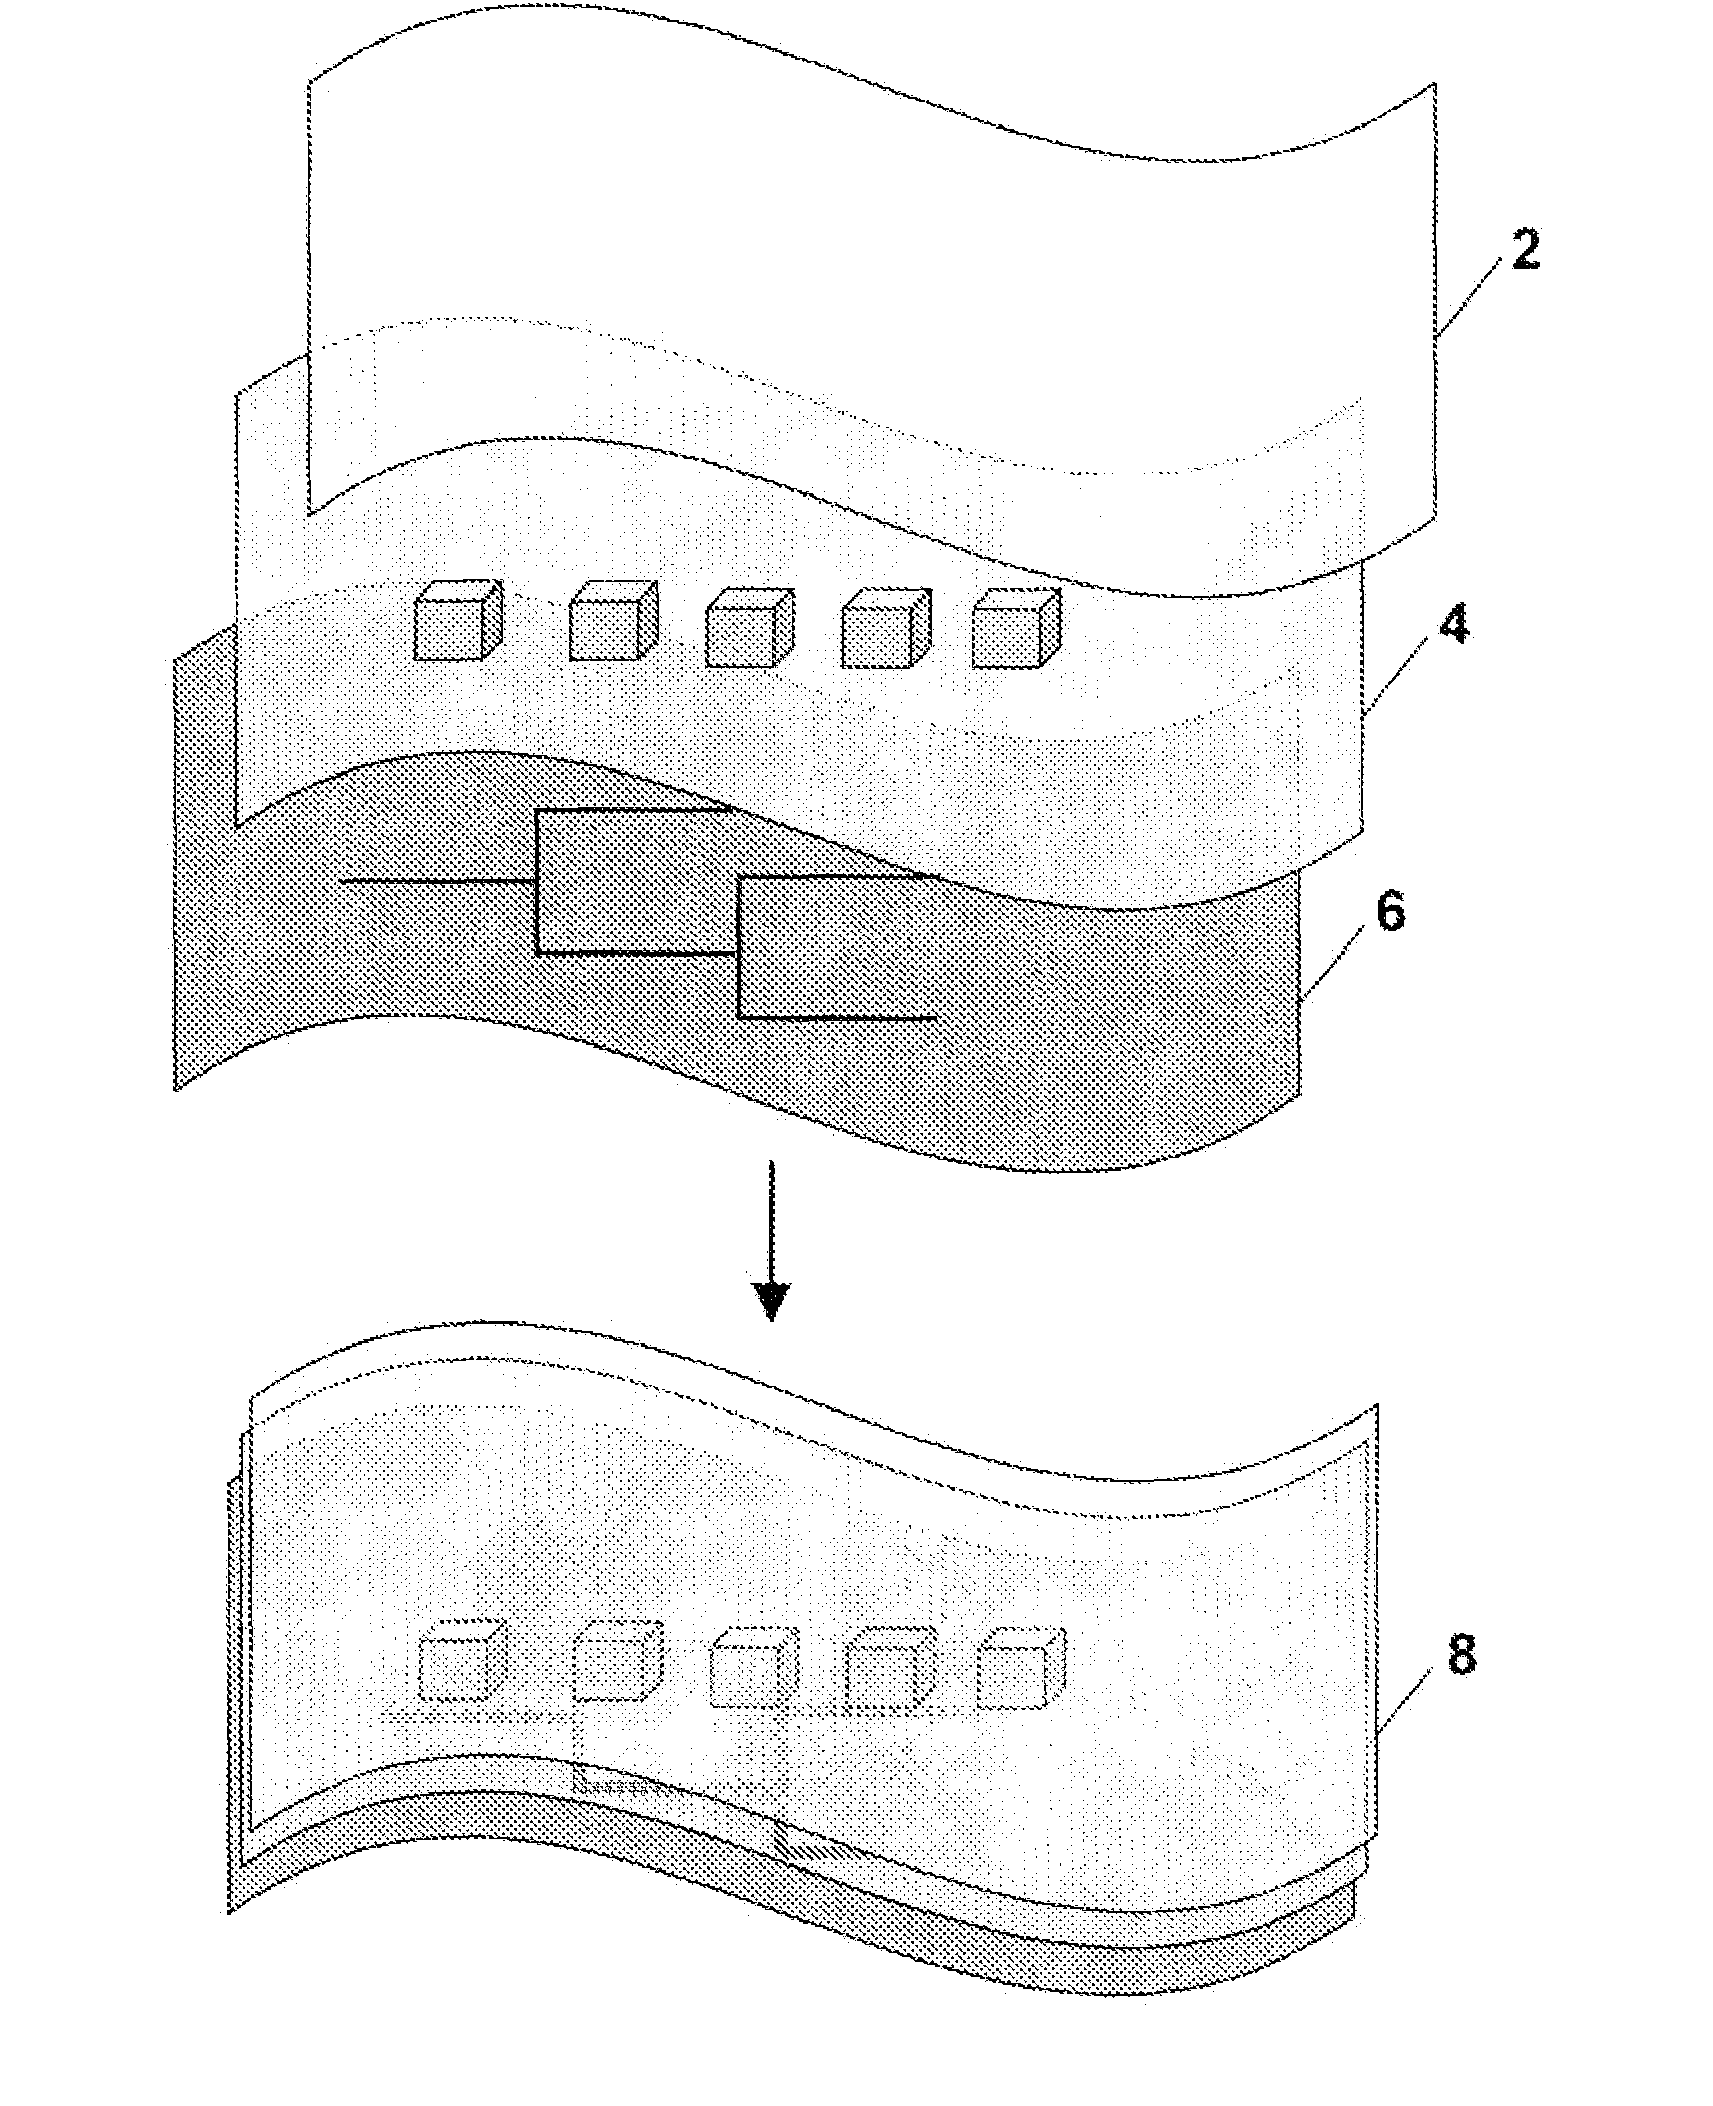 Arbitrarily-shaped multifunctional structures and method of making